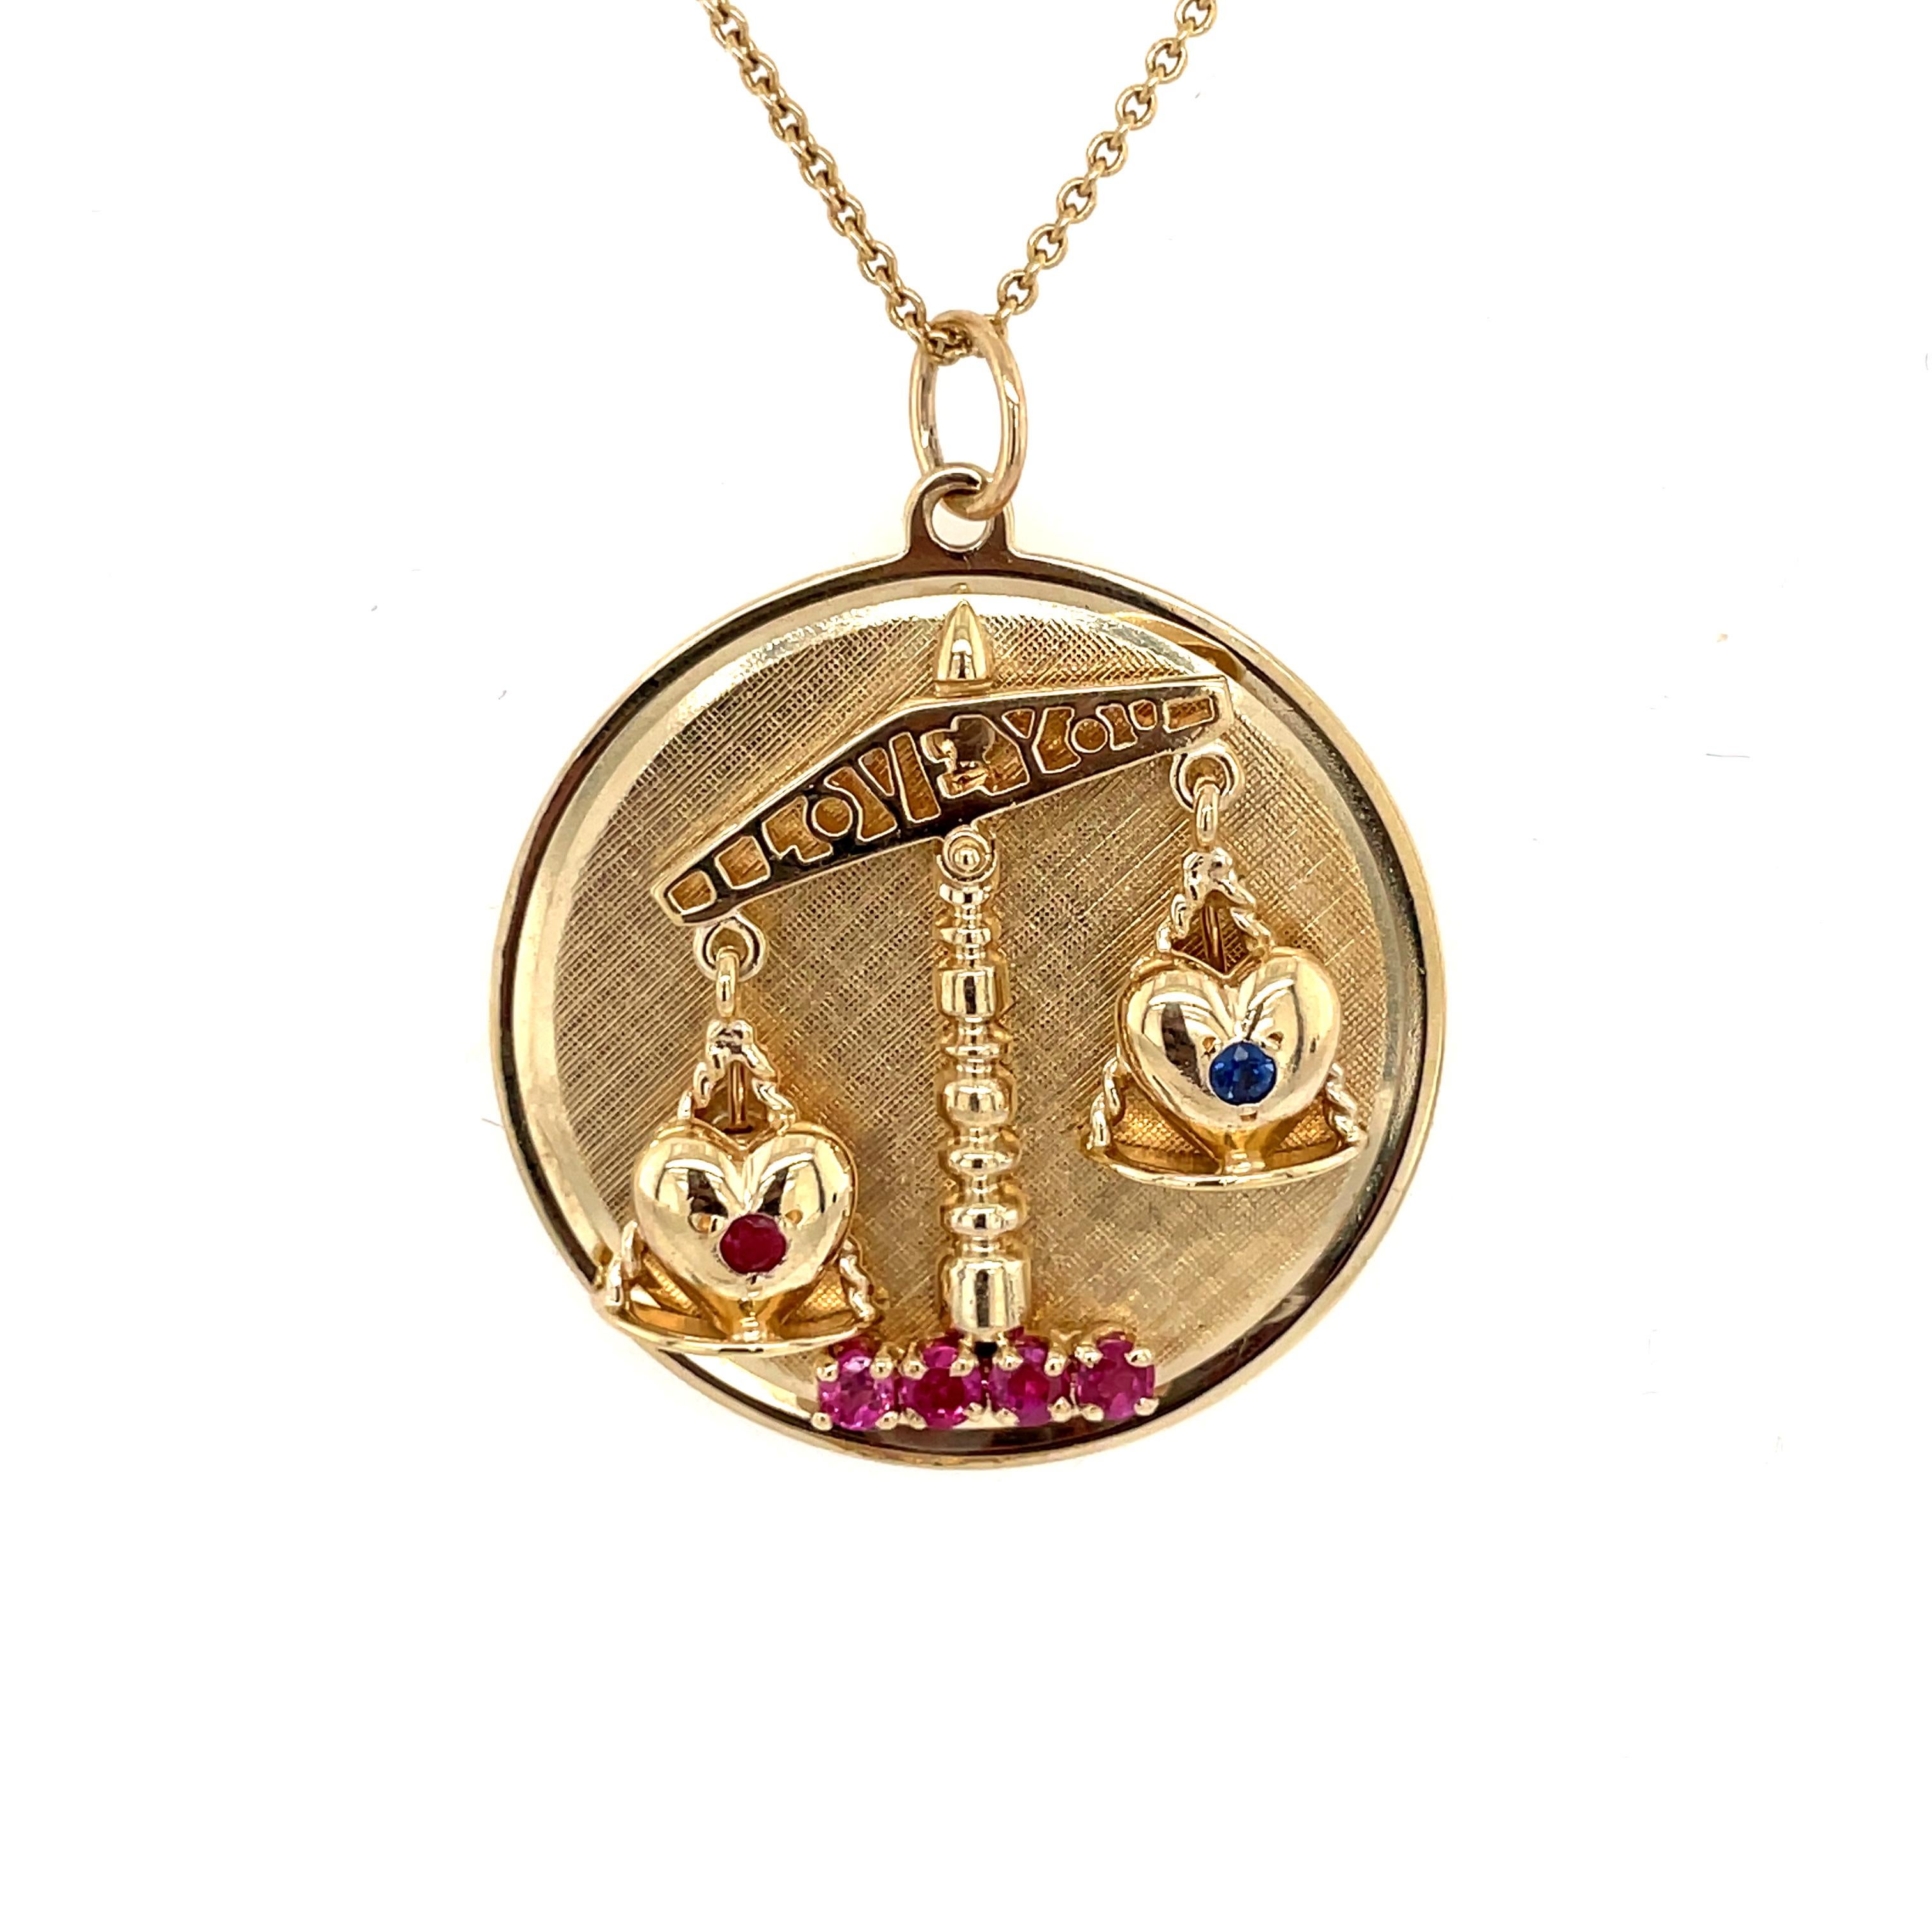 The ultimate love charm:   a round disc with a shiny gold border and textured gold background.  Made and signed by HENRY DANKNER & SONS.
In the center, there is an applied scale of justice set with two shiny gold hearts.   One heart is set with a